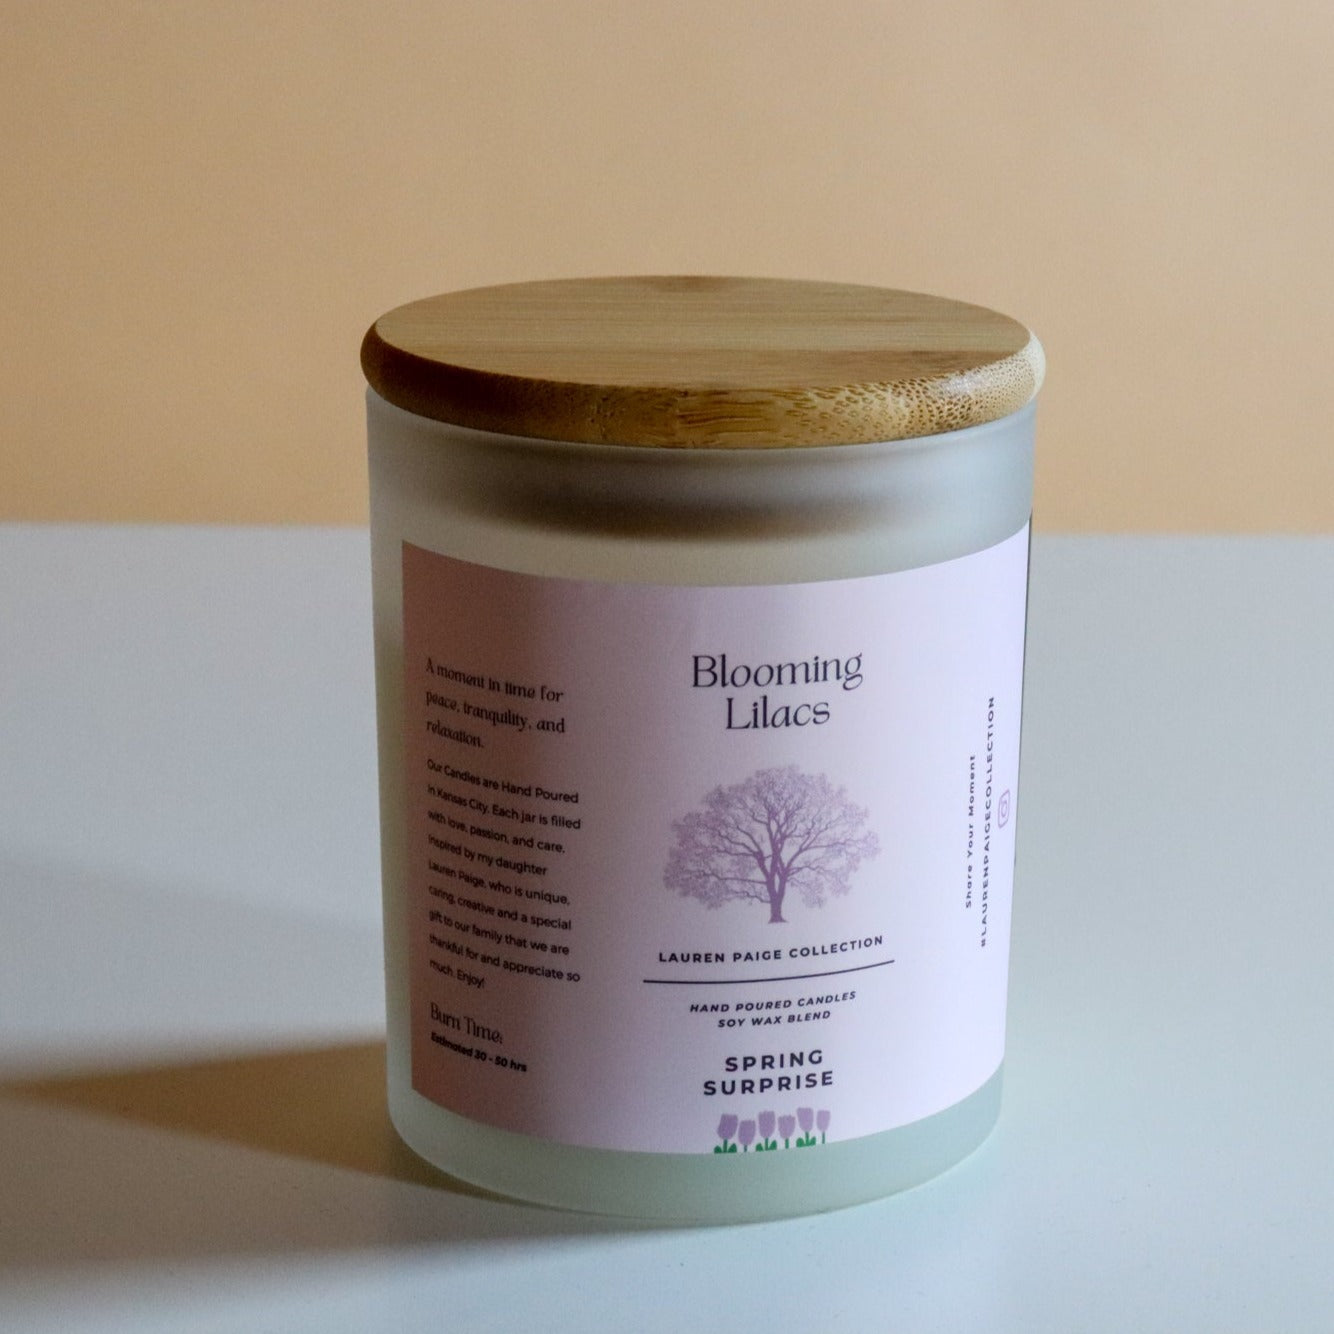 Blooming Lilacs | Spring Surprise Collection | Soy + Coconut Wax Blend